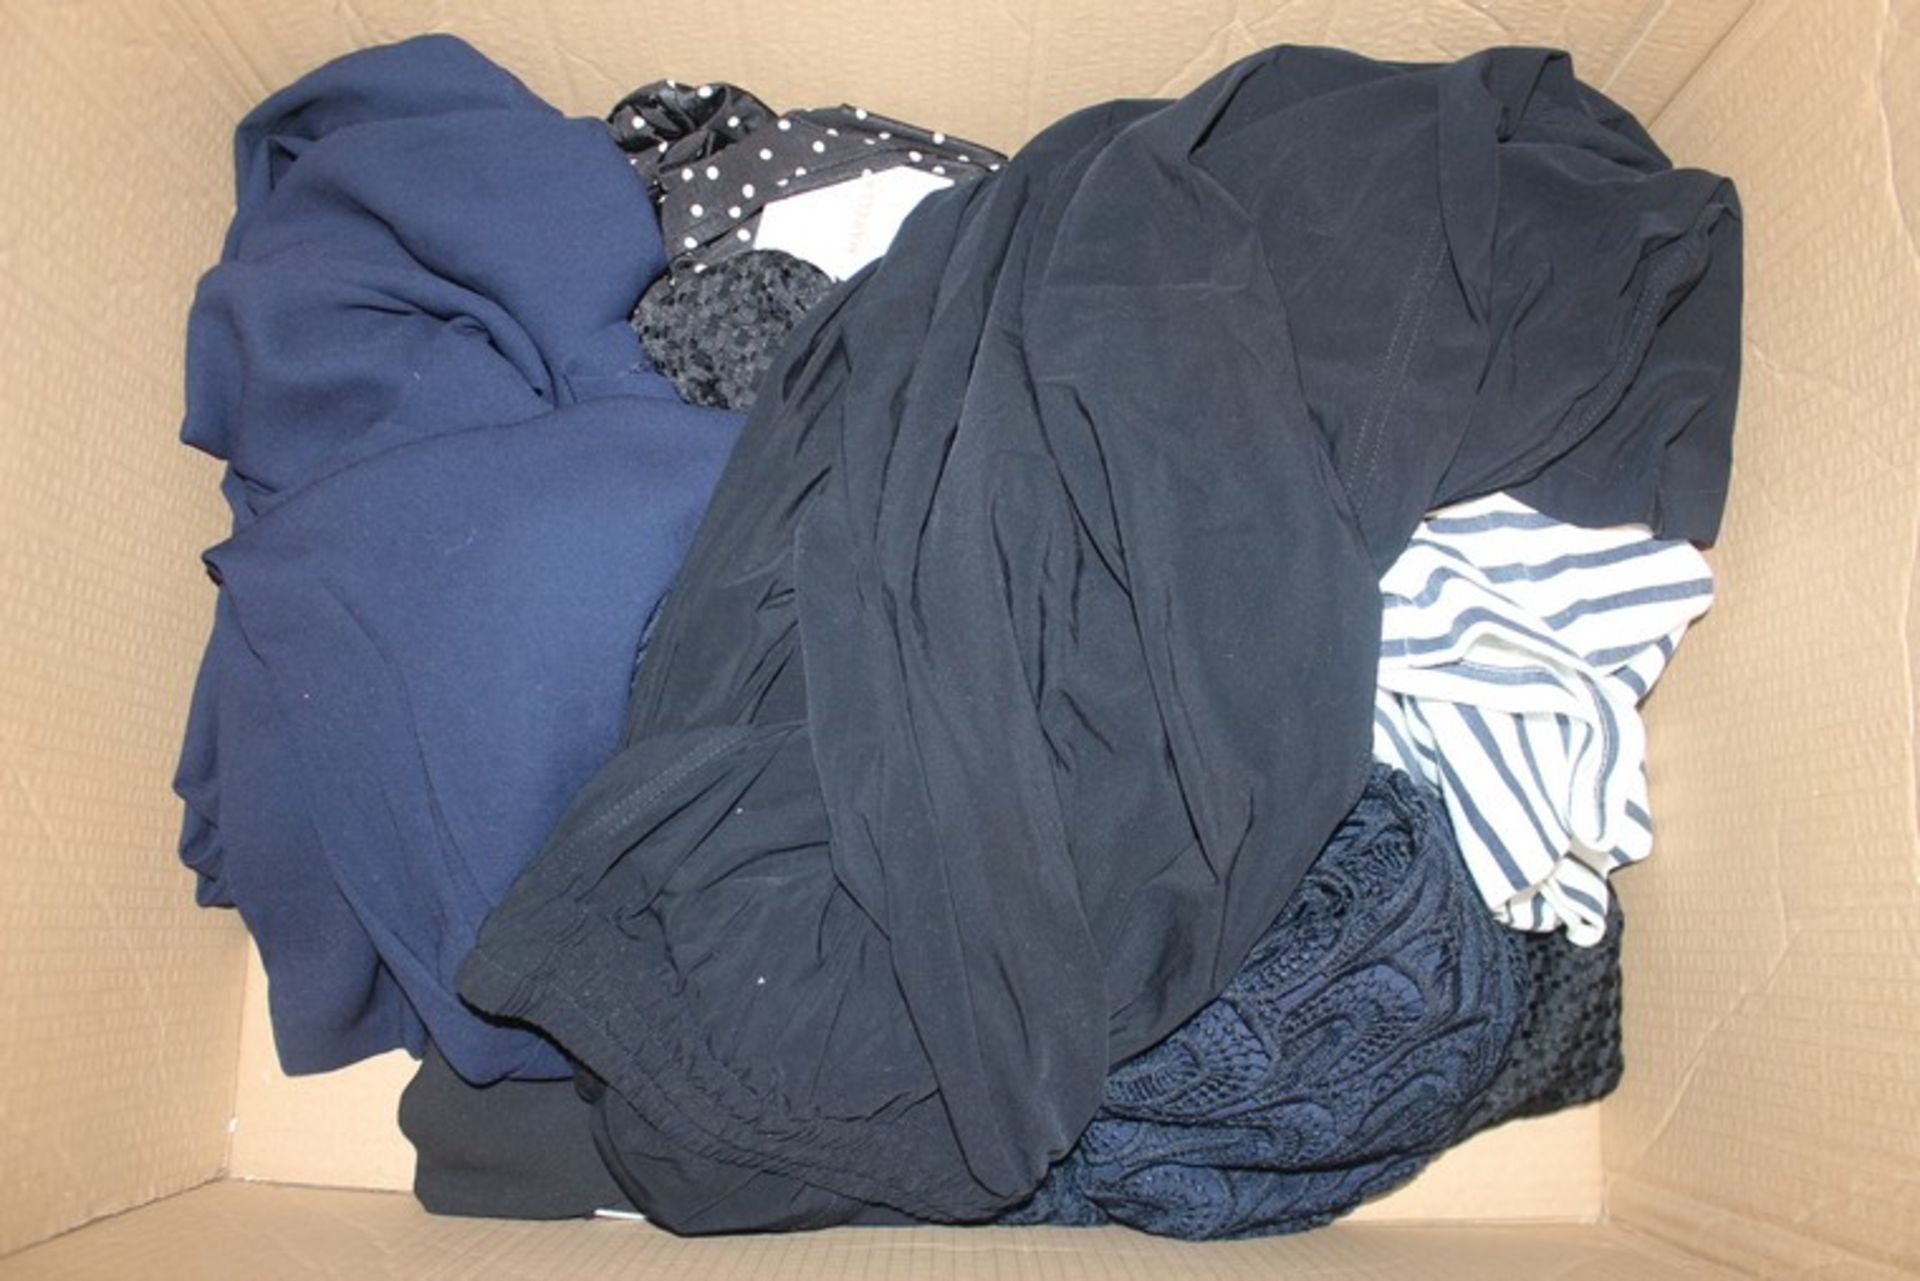 10 x ASSORTED CLOTHING ITEMS (22.09.17) (39.102) *PLEASE NOTE THAT THE BID PRICE IS MULTIPLIED BY